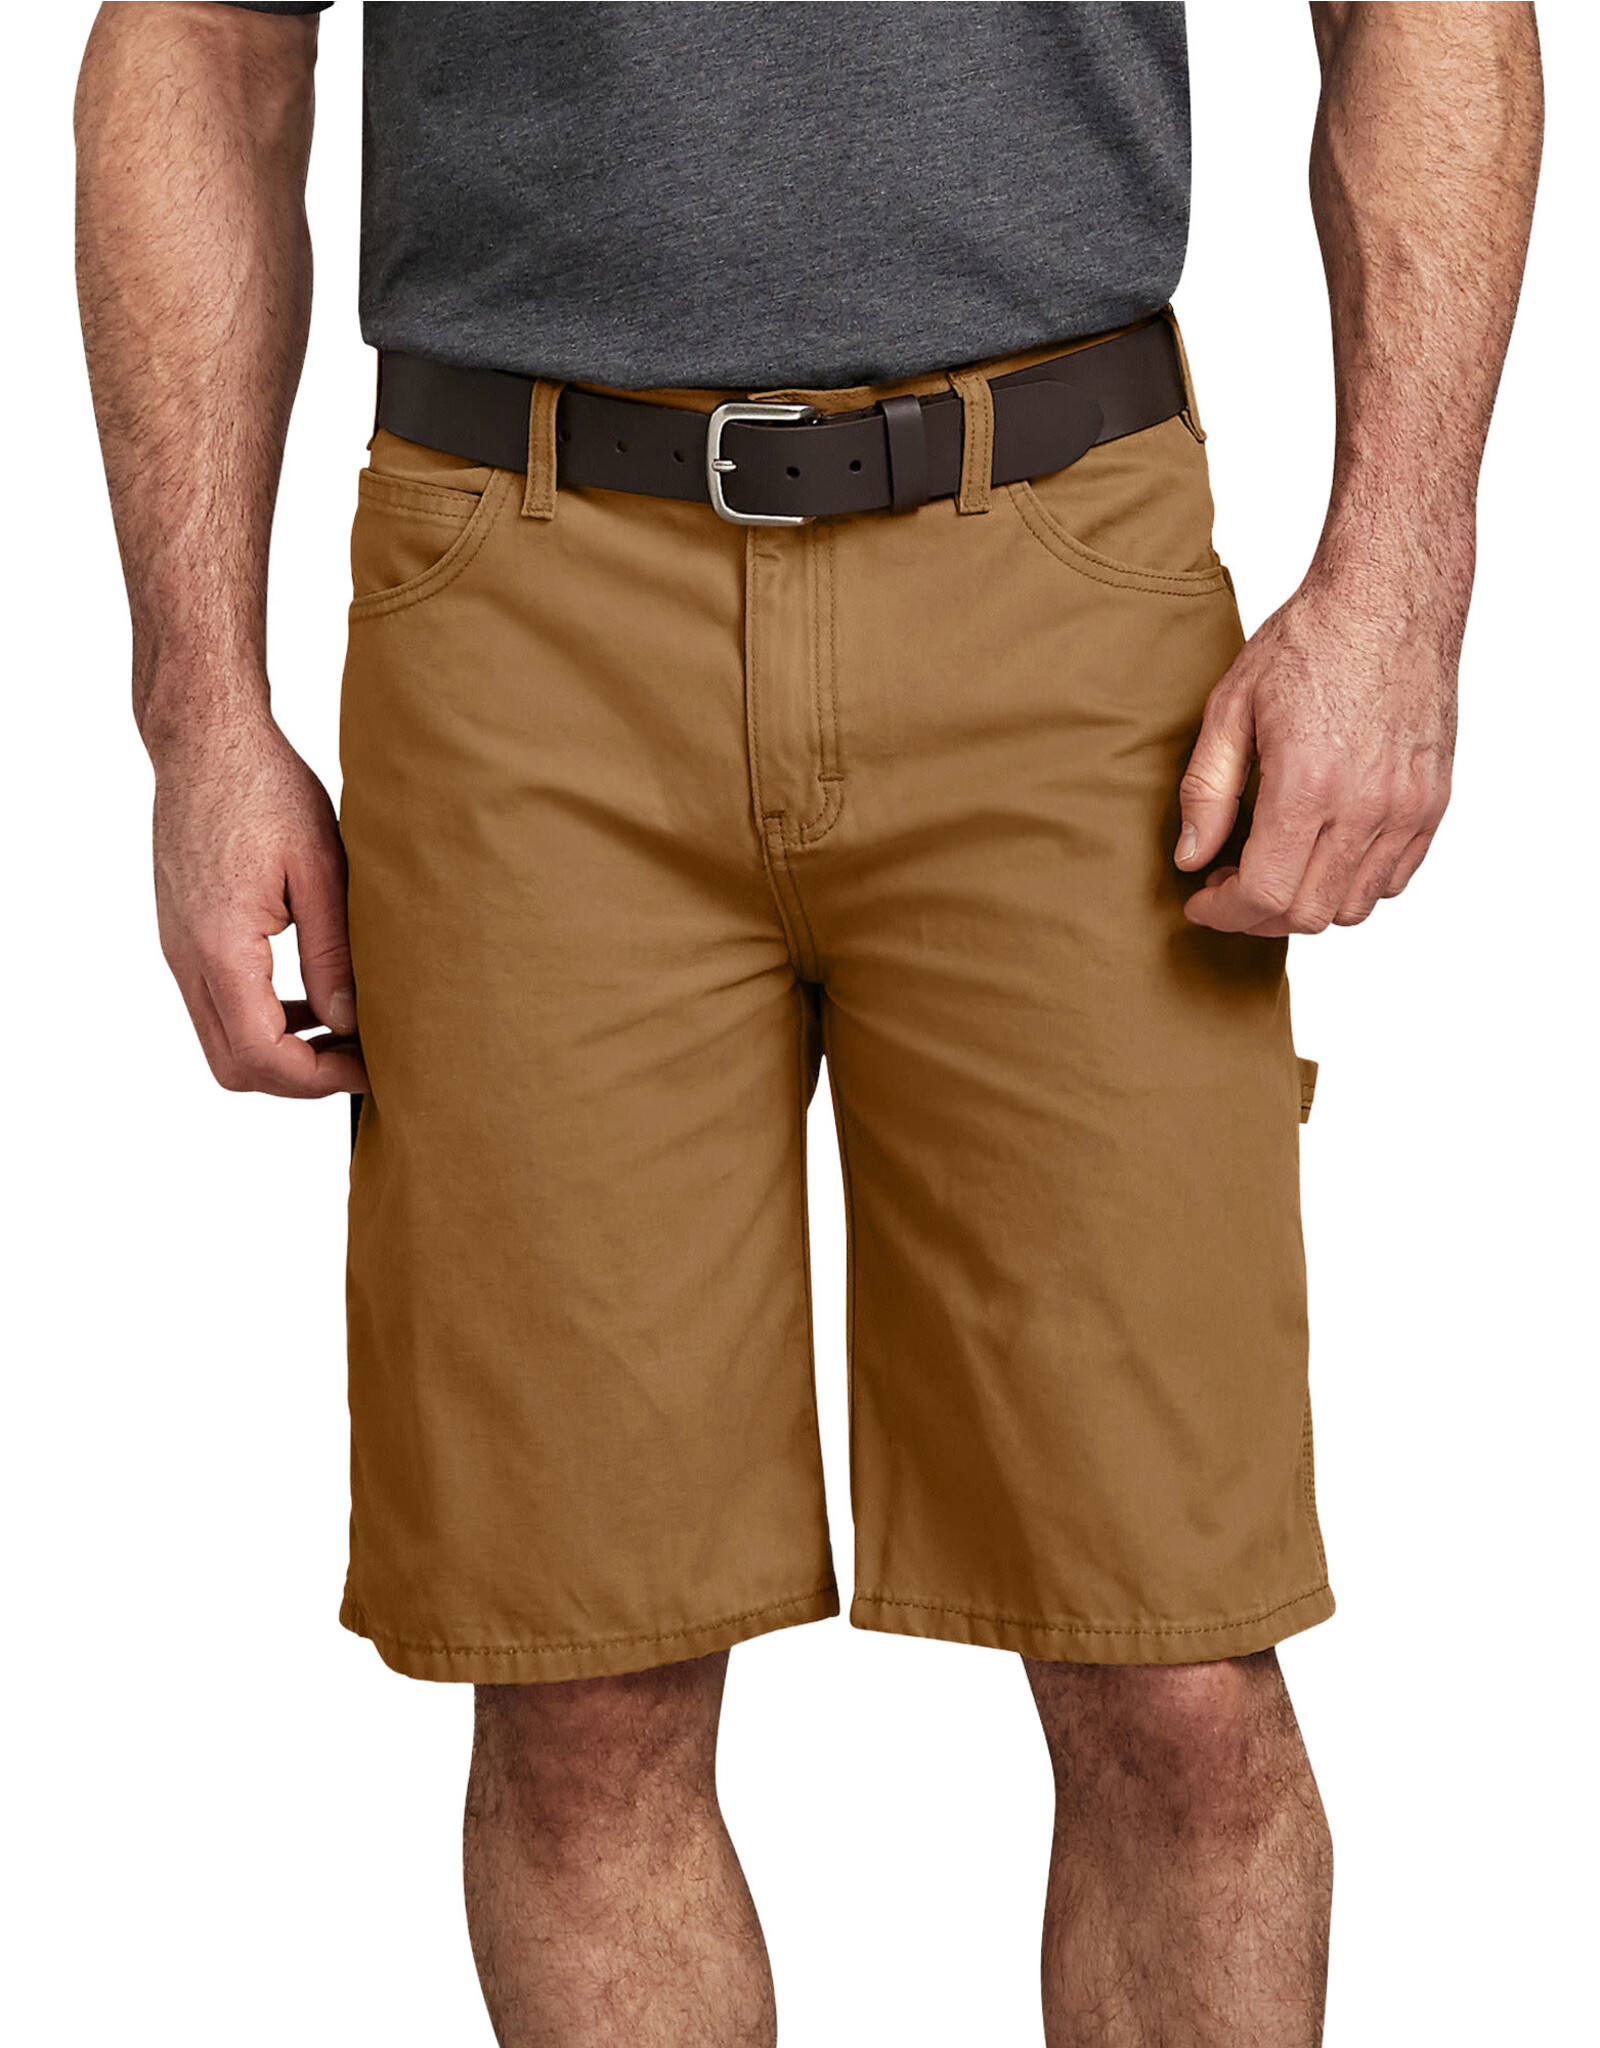 DICKIES 11" Relaxed Fit Duck Carpenter Shorts  Brown Duck - DX250RBD